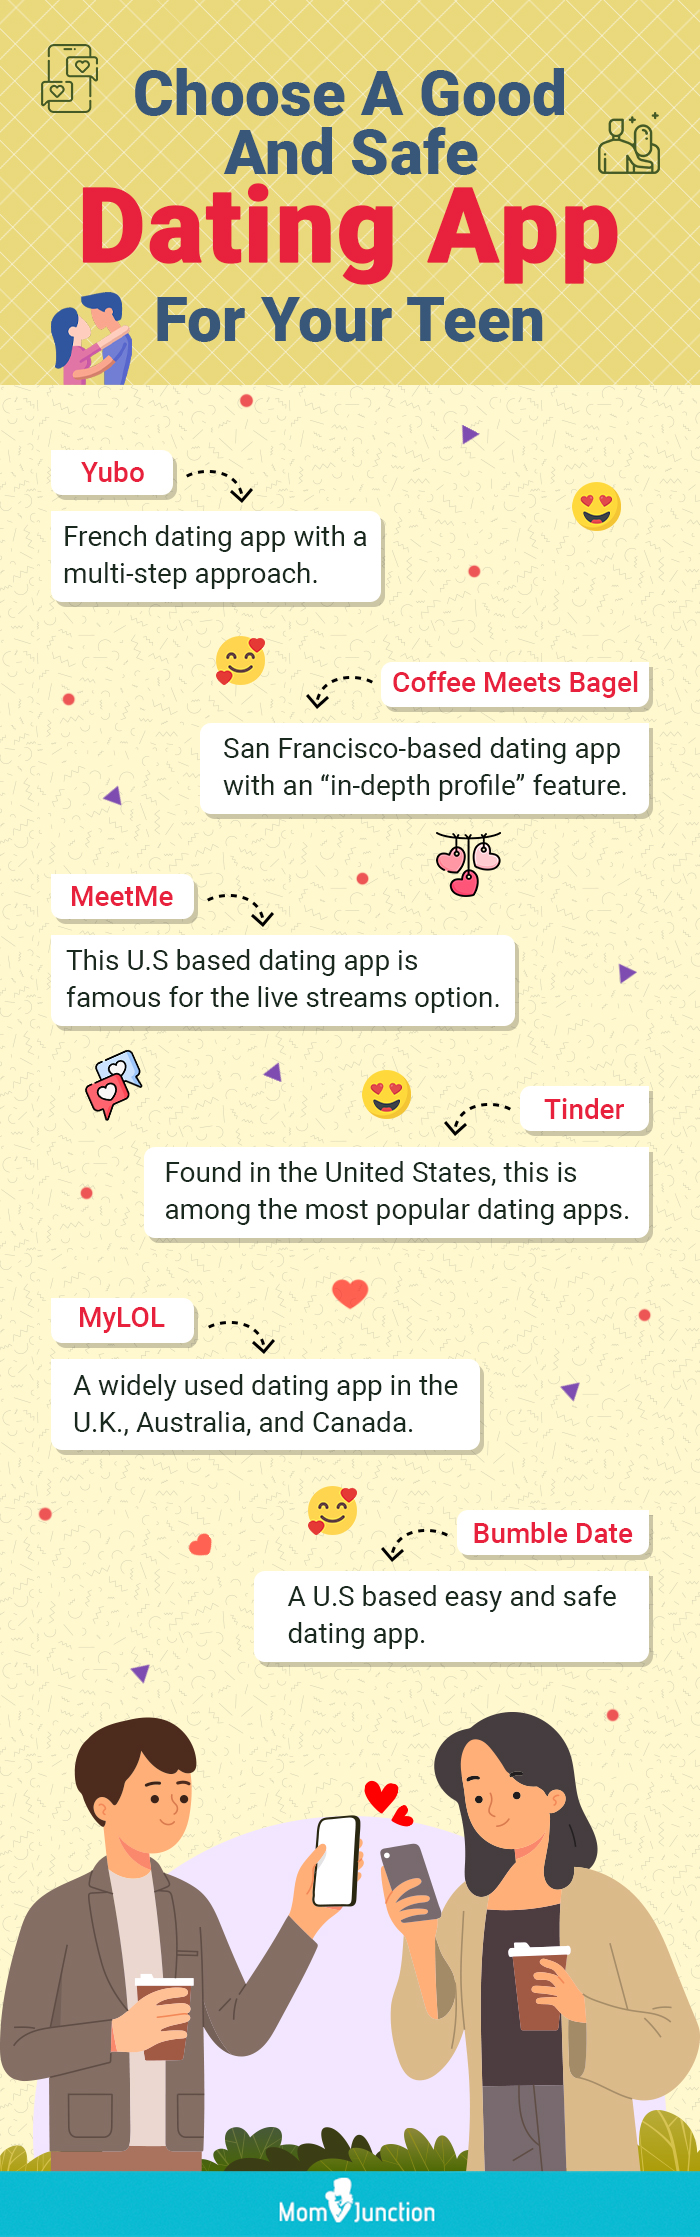 best online dating site our time